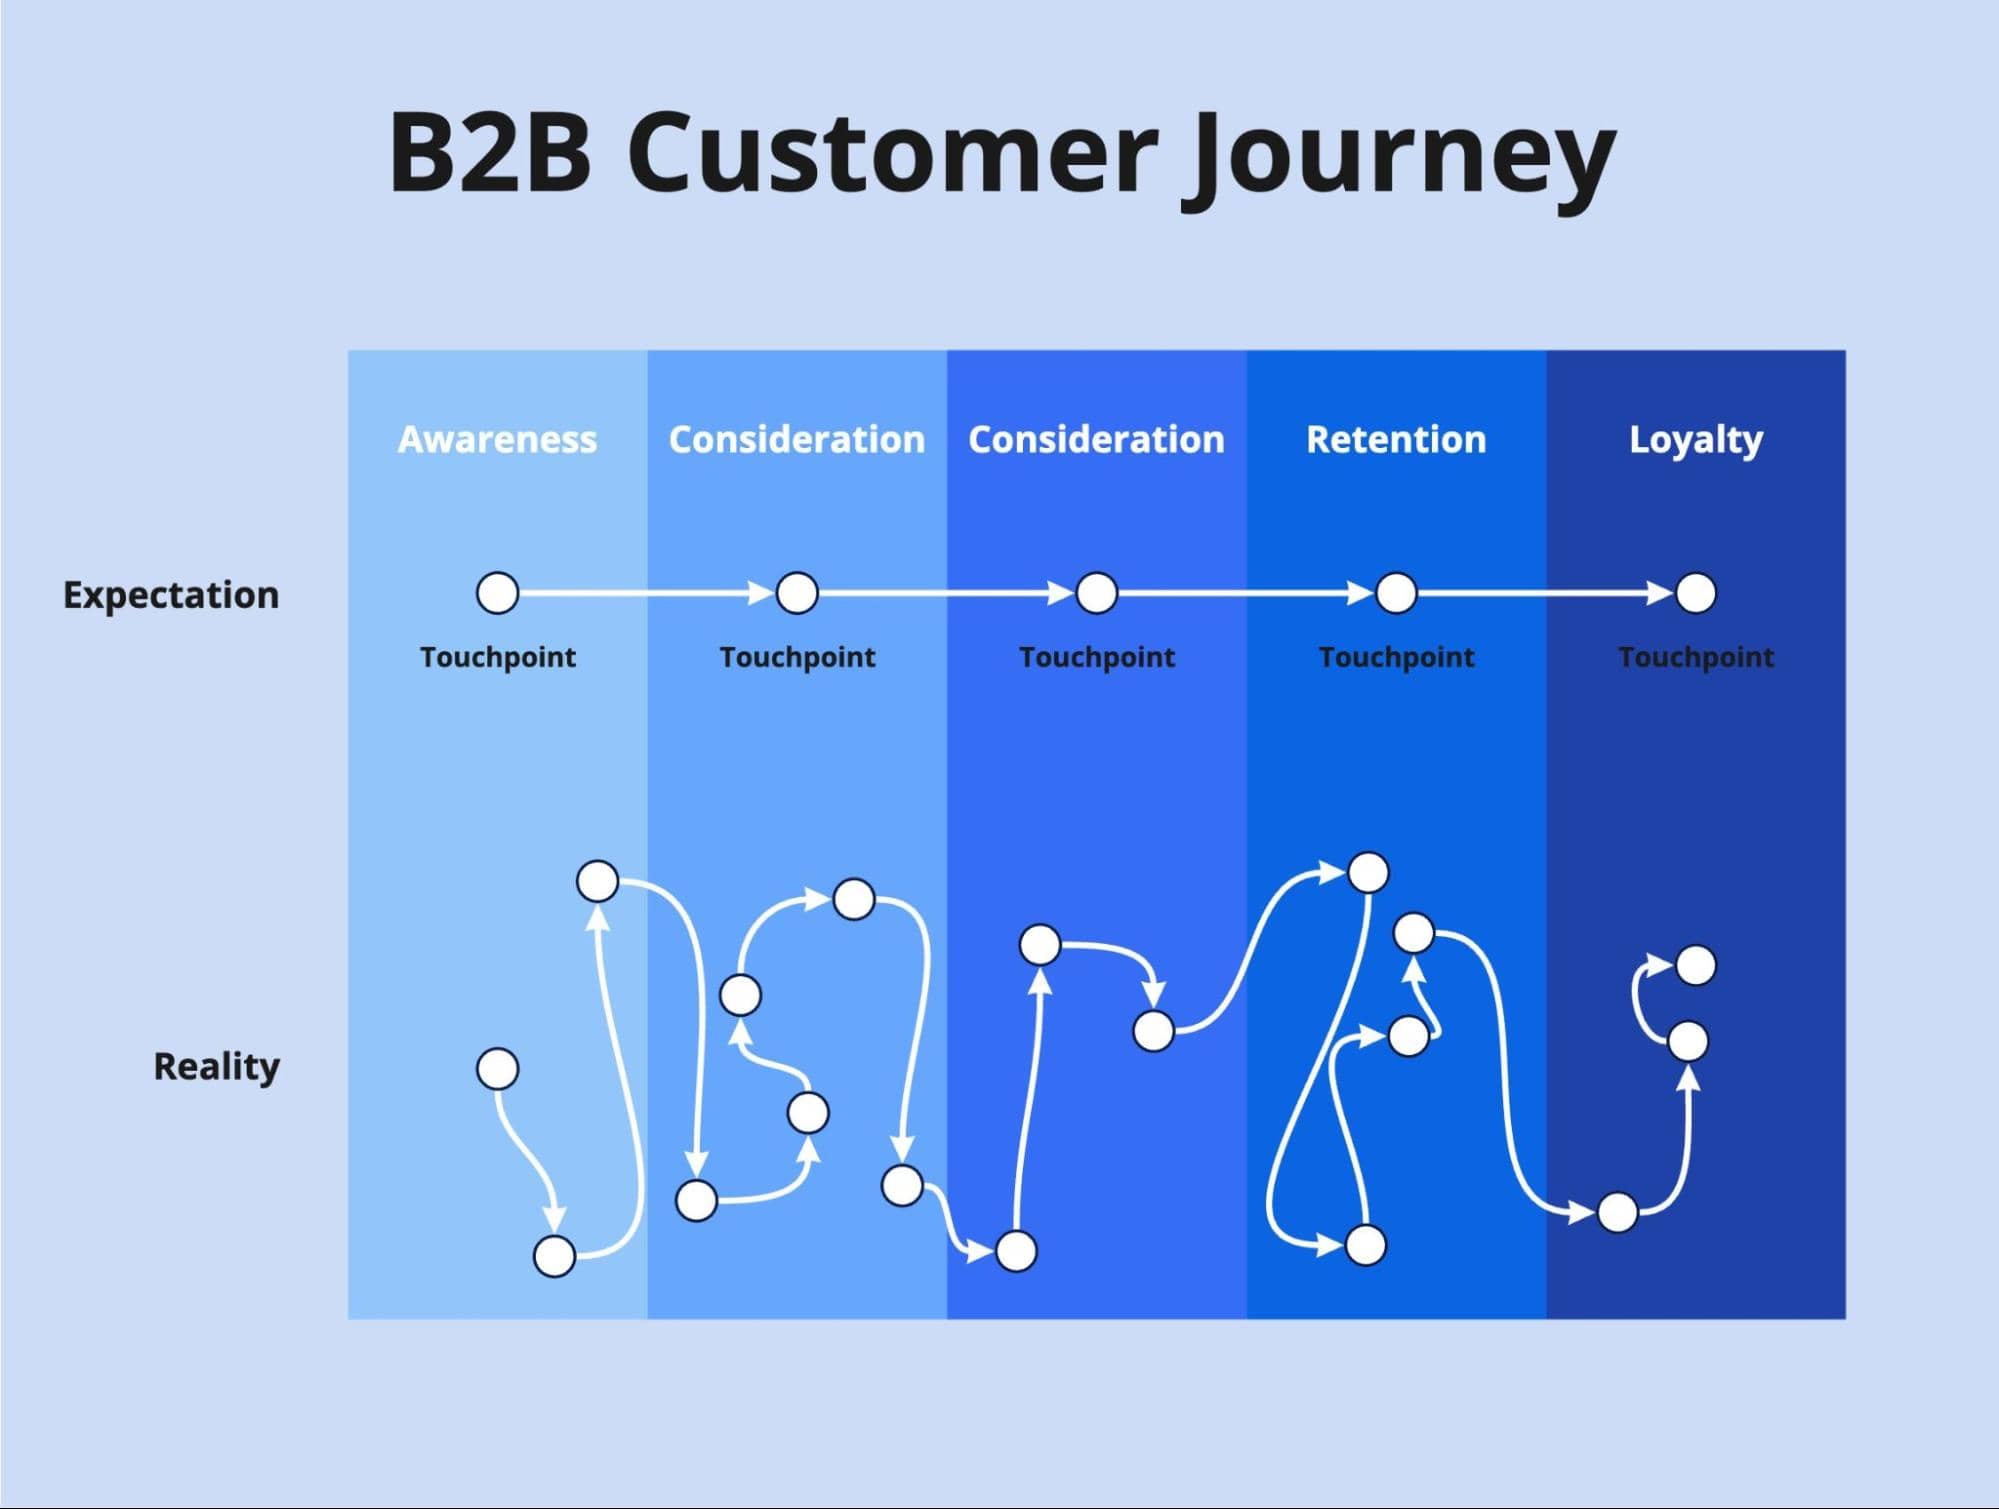 b2b customer journey touchpoints: expectations (straight line) vs reality (a labyrinth)